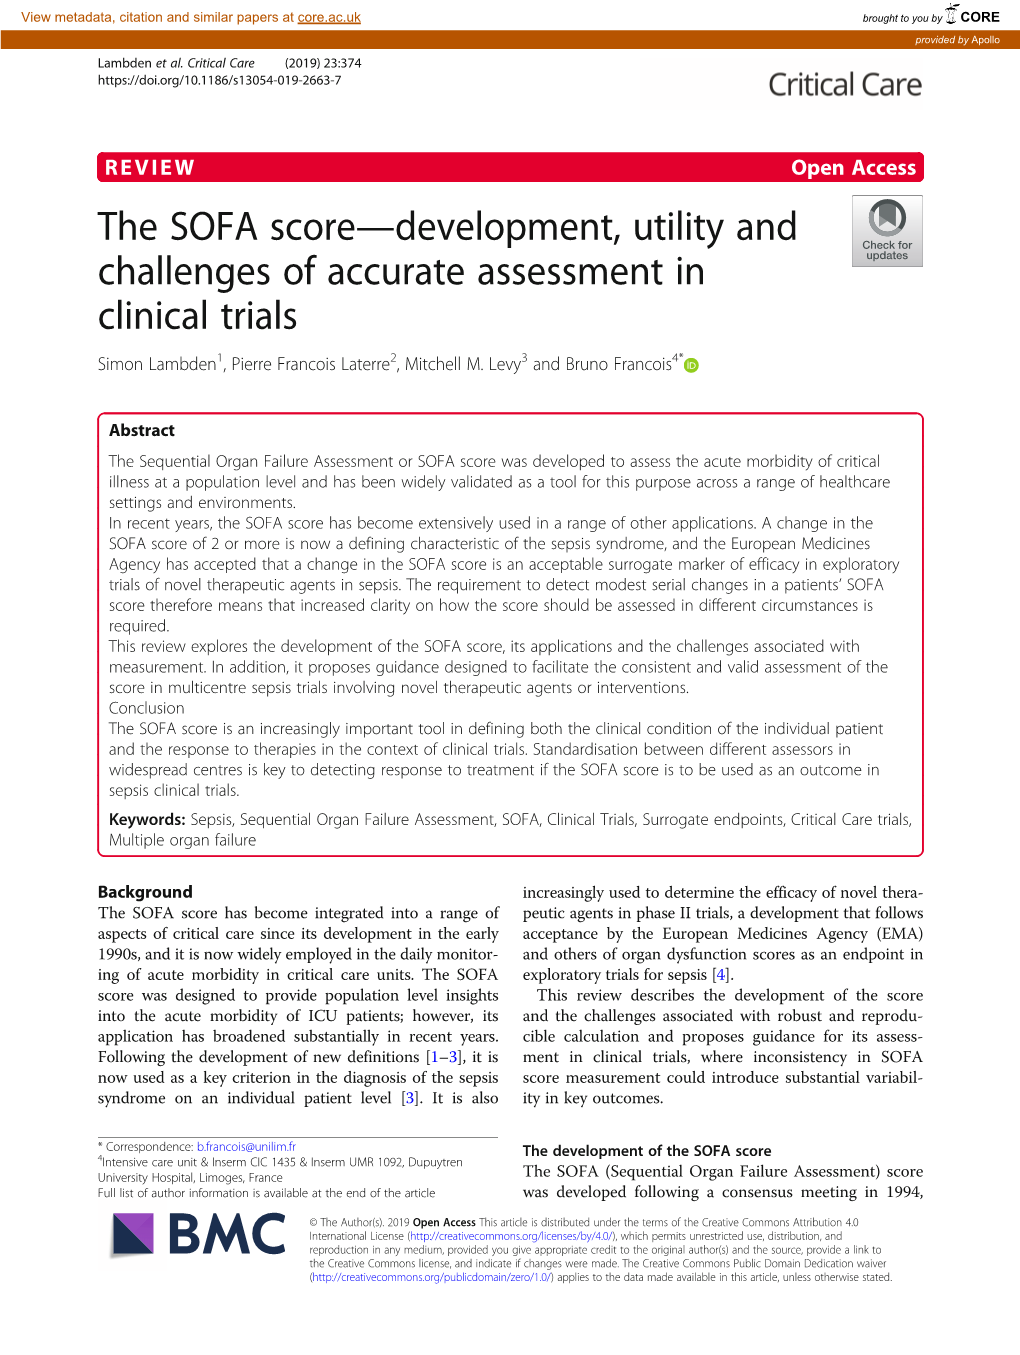 The SOFA Score—Development, Utility and Challenges of Accurate Assessment in Clinical Trials Simon Lambden1, Pierre Francois Laterre2, Mitchell M